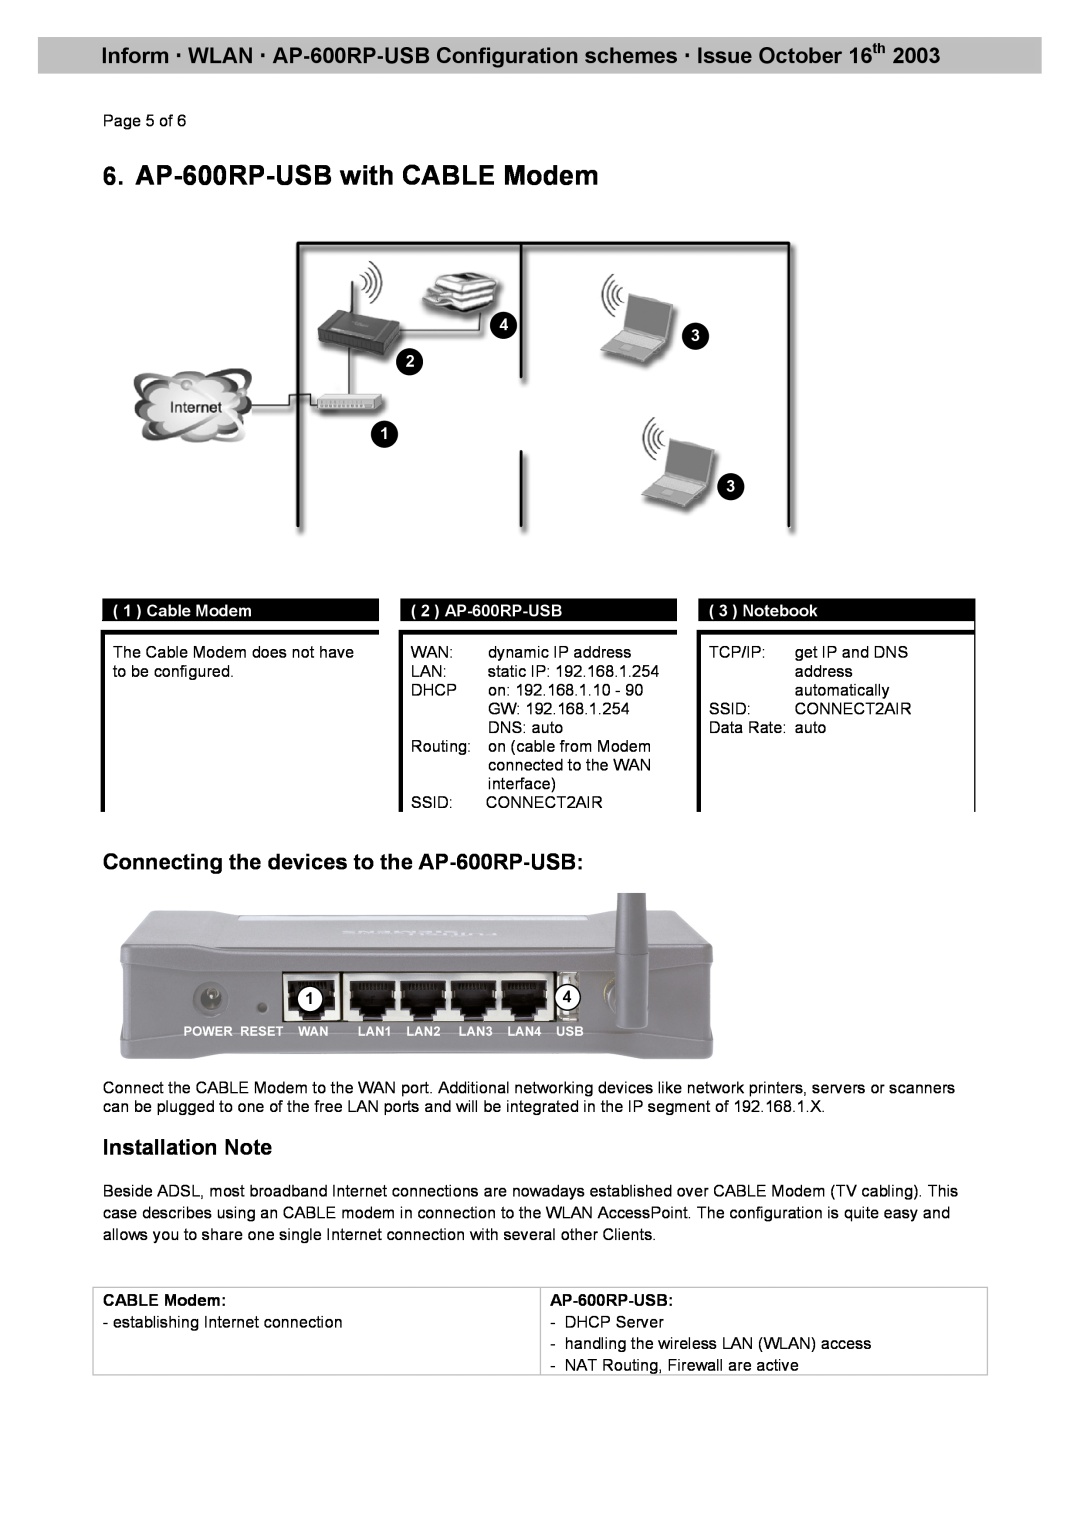 Fujitsu manual AP-600RP-USB with CABLE Modem, Cable Modem, Connecting the devices to the AP-600RP-USB, Installation Note 